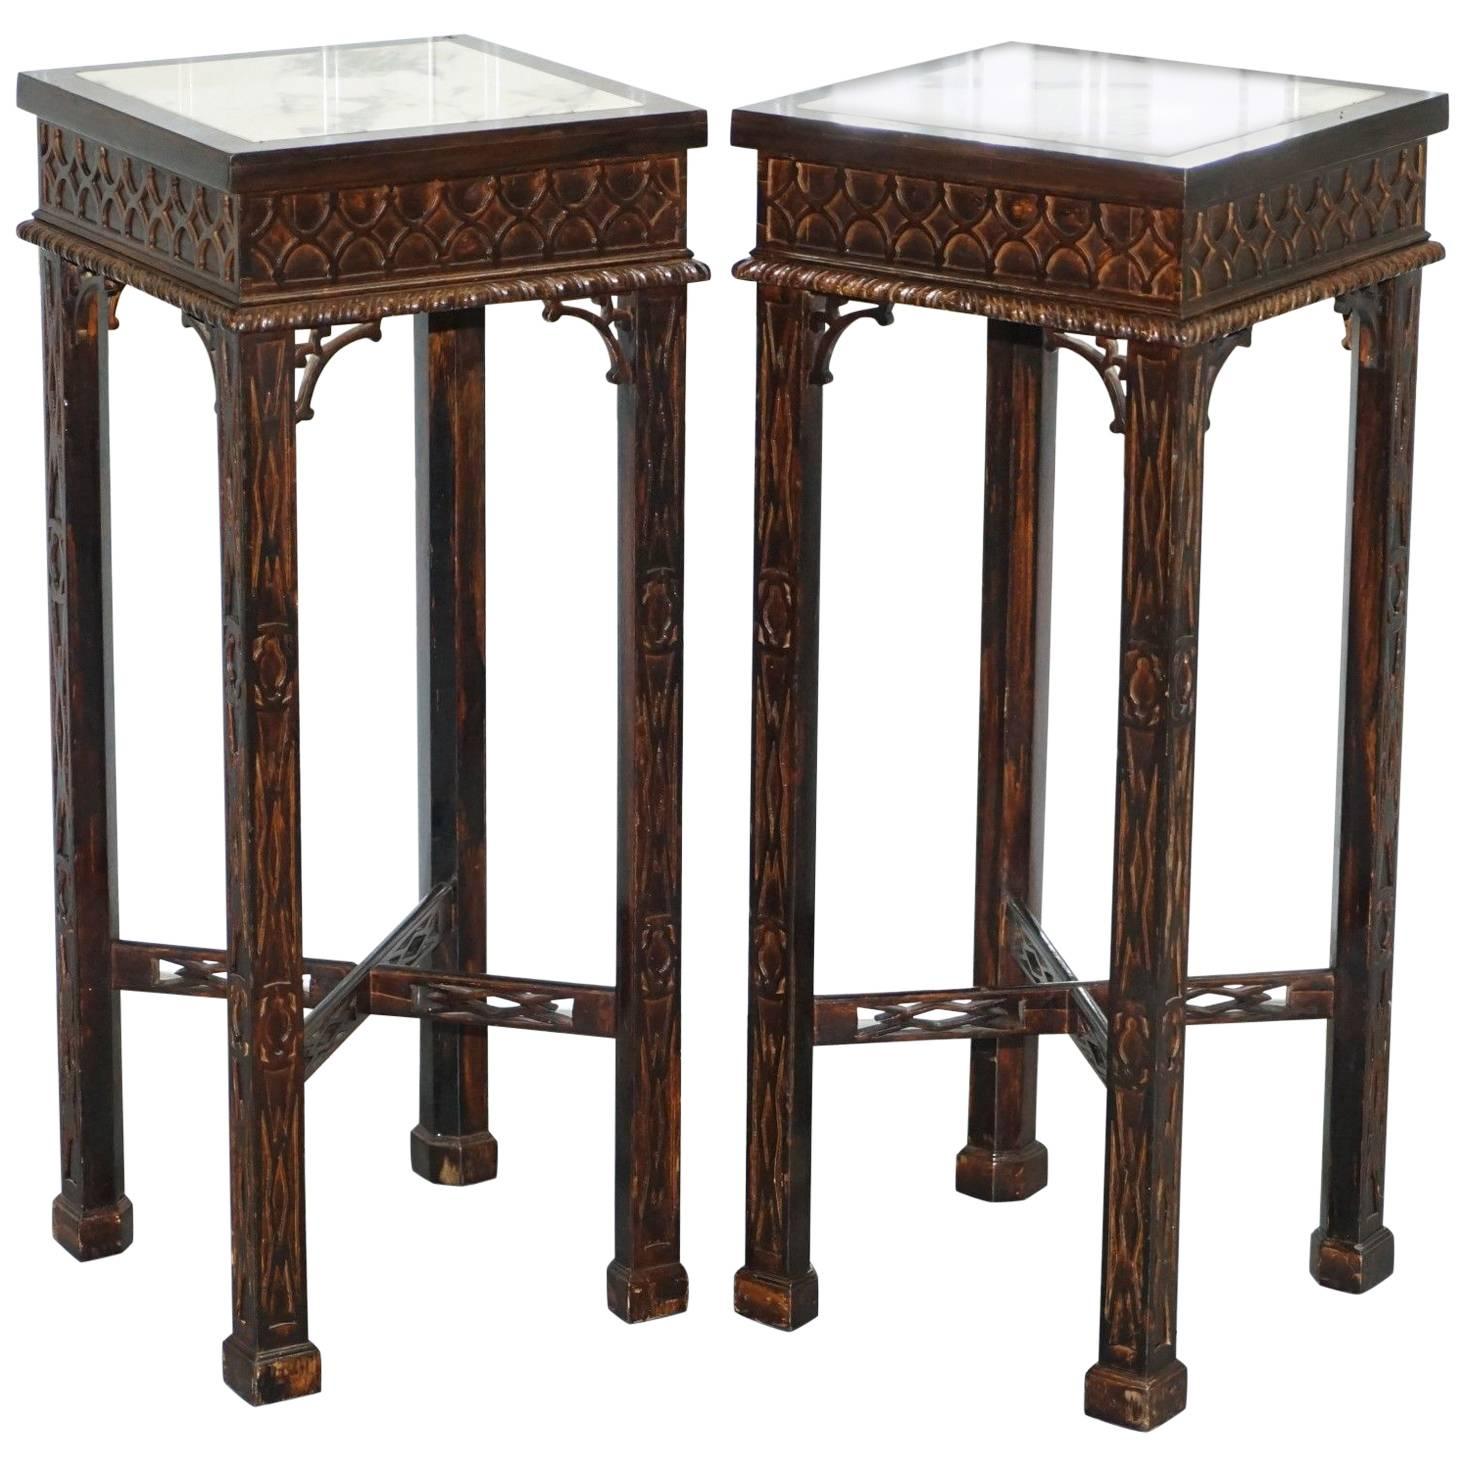 Pair of Thomas Chippendale Chinese Style Marble & Carved Wood Jardinière Stands